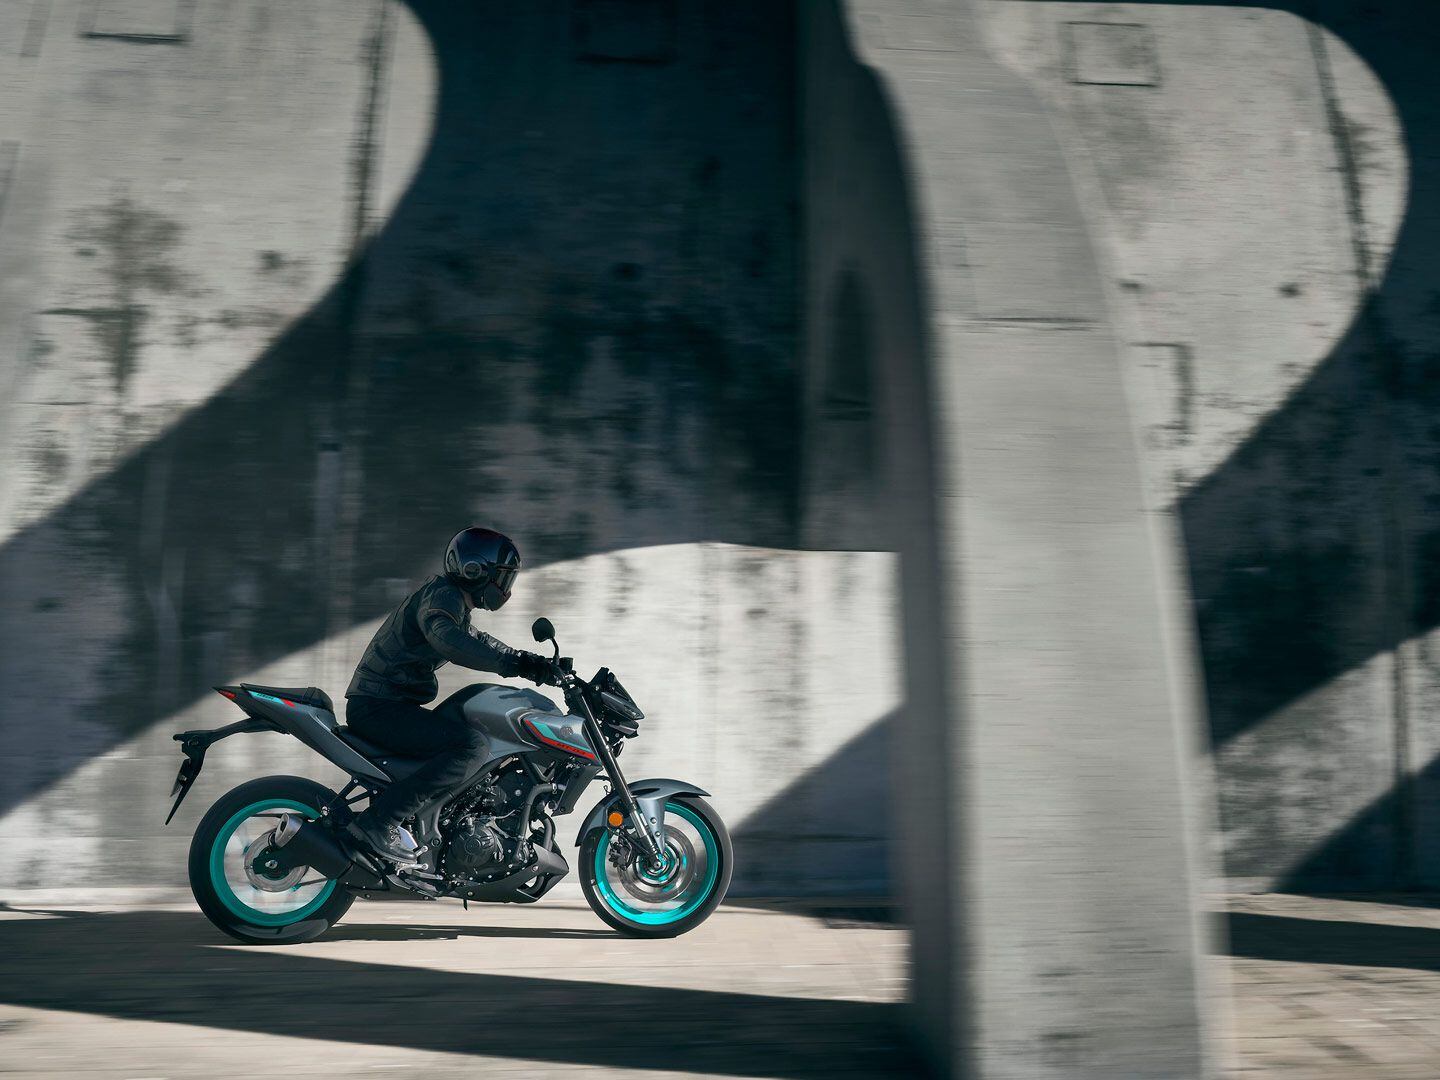 The Yamaha MT-03 returns to take on the concrete jungle for any sized rider.